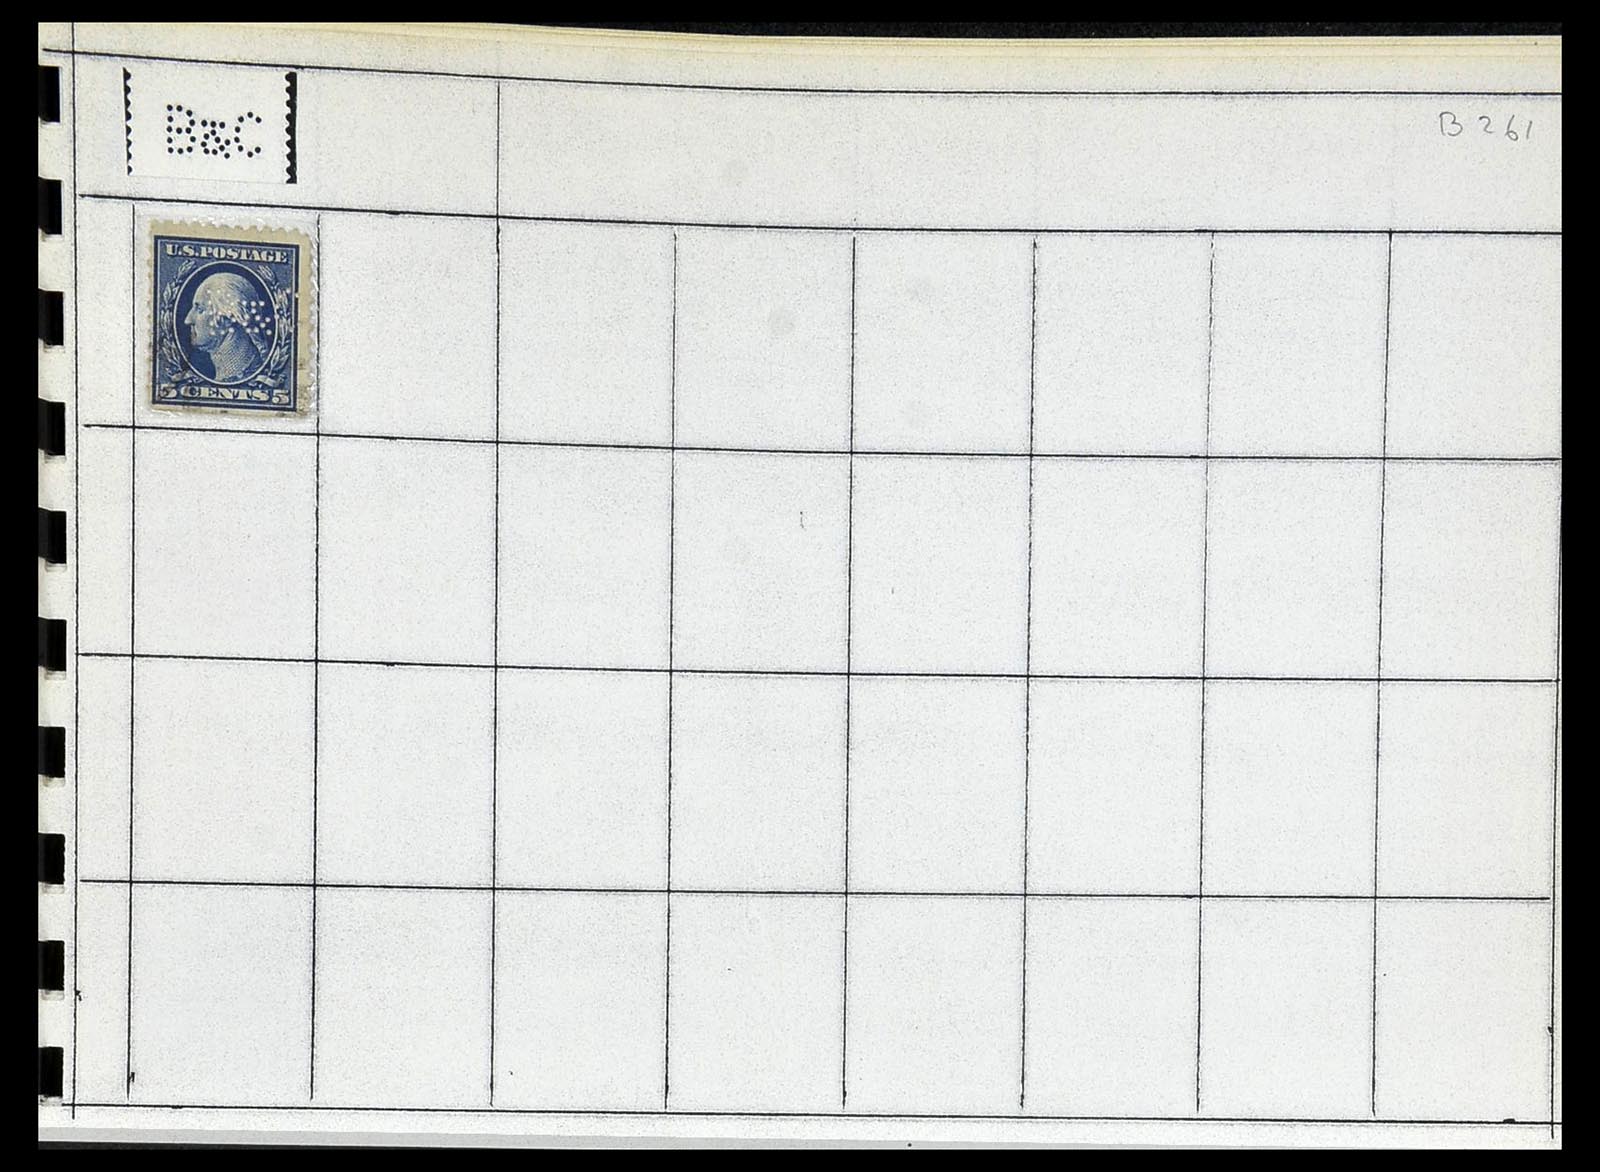 34417 100 - Stamp Collection 34417 USA perfins 1900-1980.